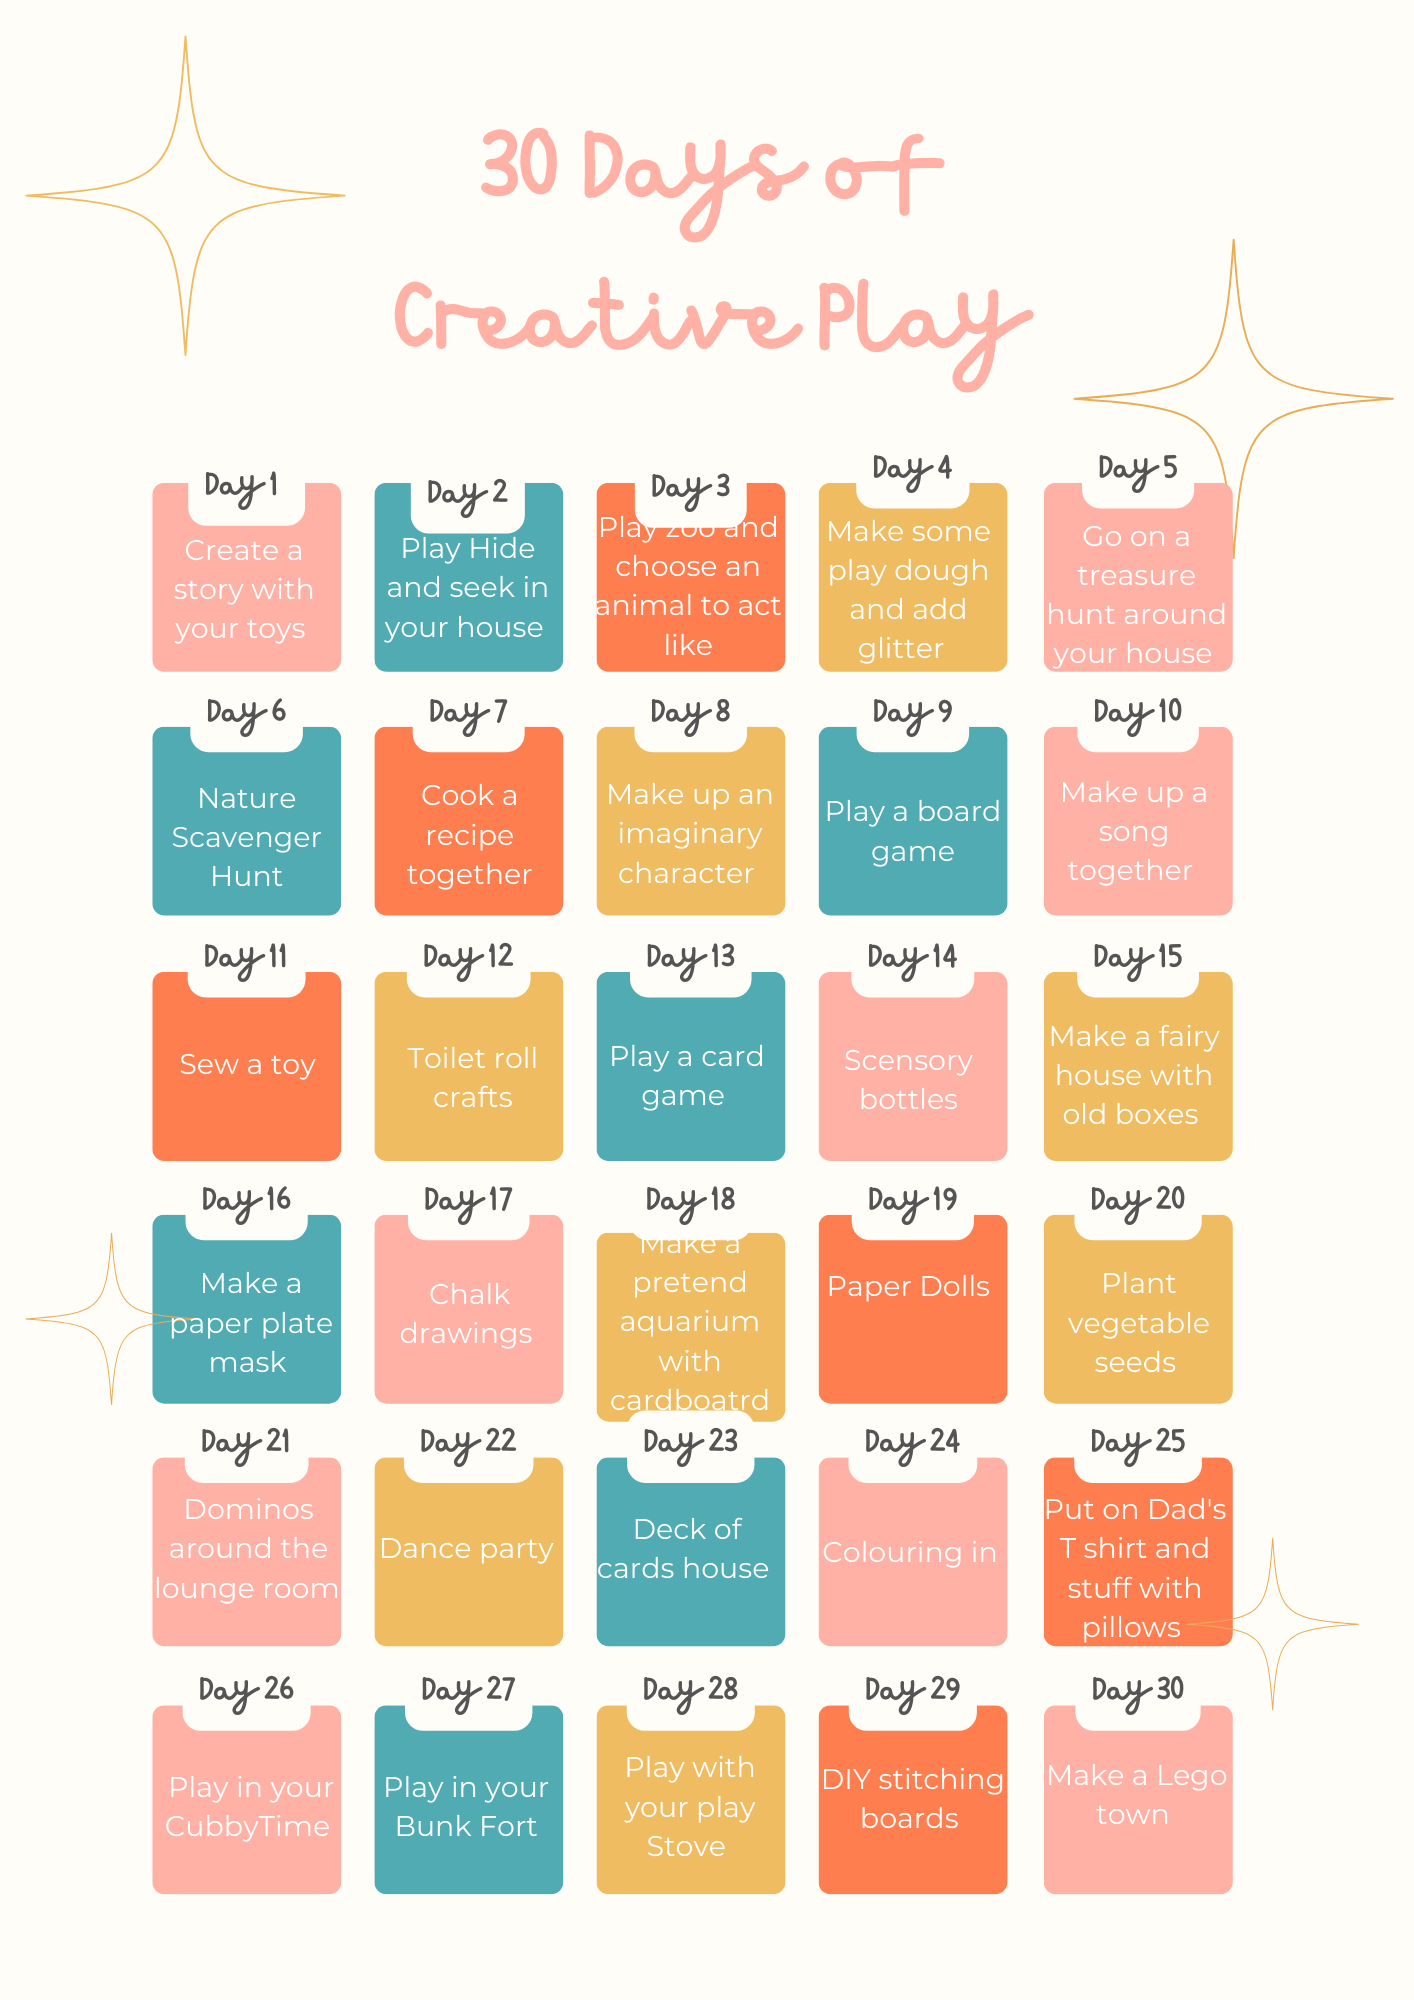 30 Days of Creative Play Download